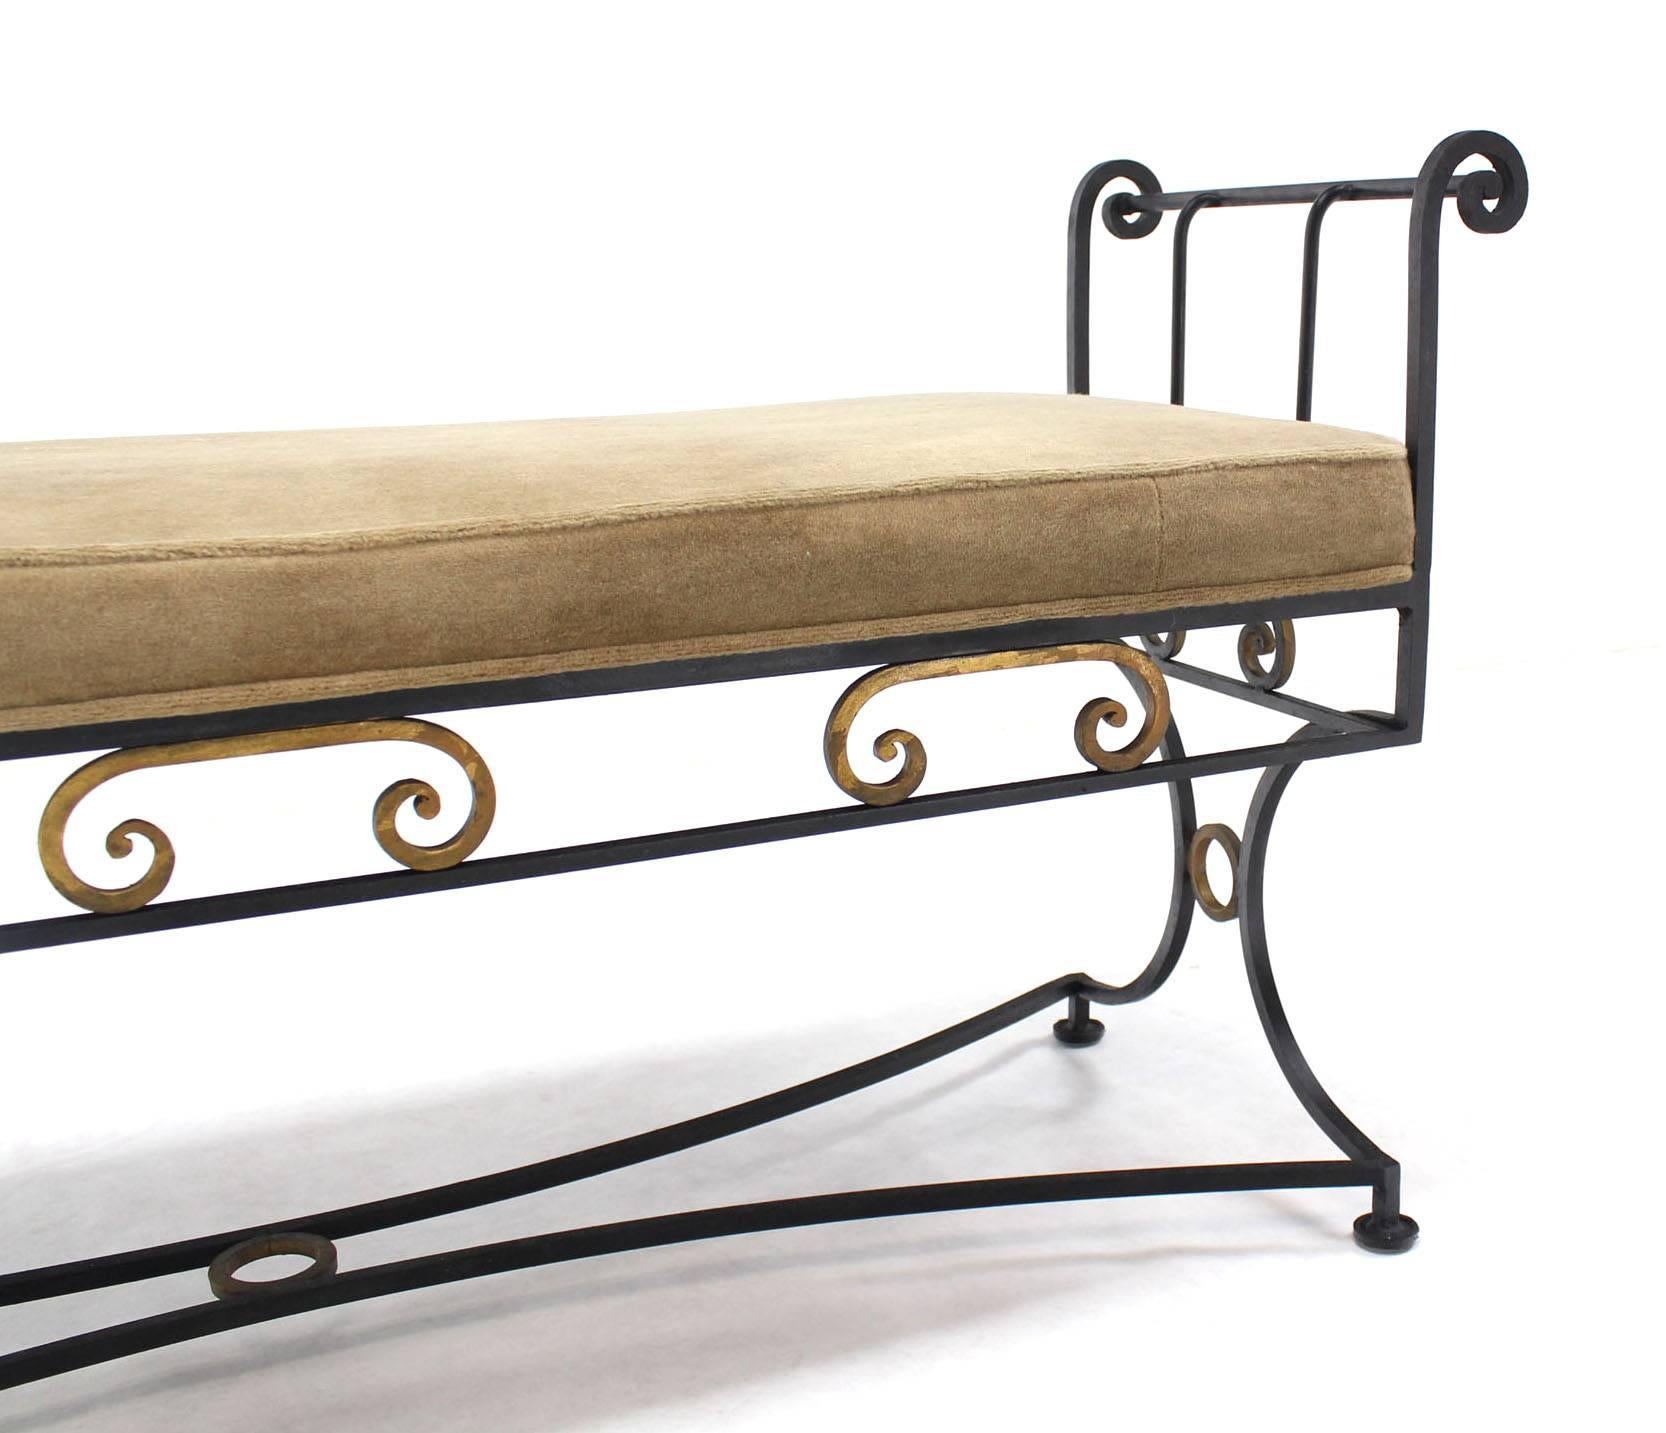 American Wrought Iron Fine Ornate Design Hollywood Regency Window Bench New Upholstery